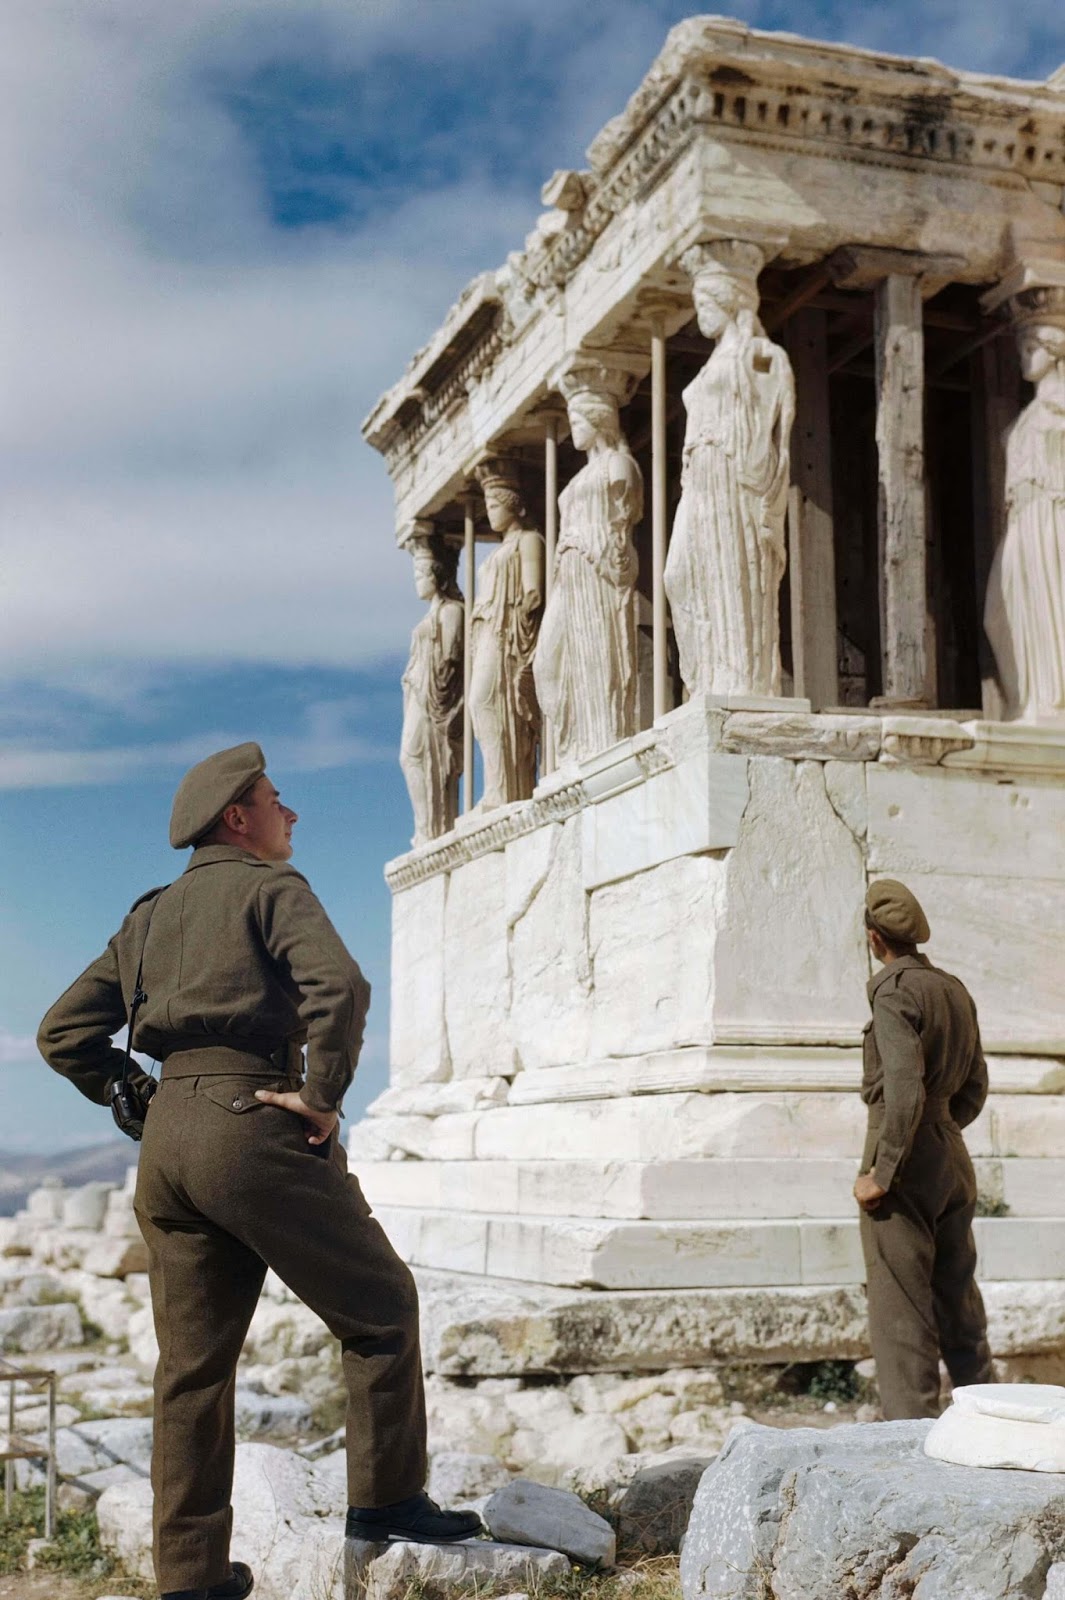 New Rare Colored Historical Pictures From The Second World War